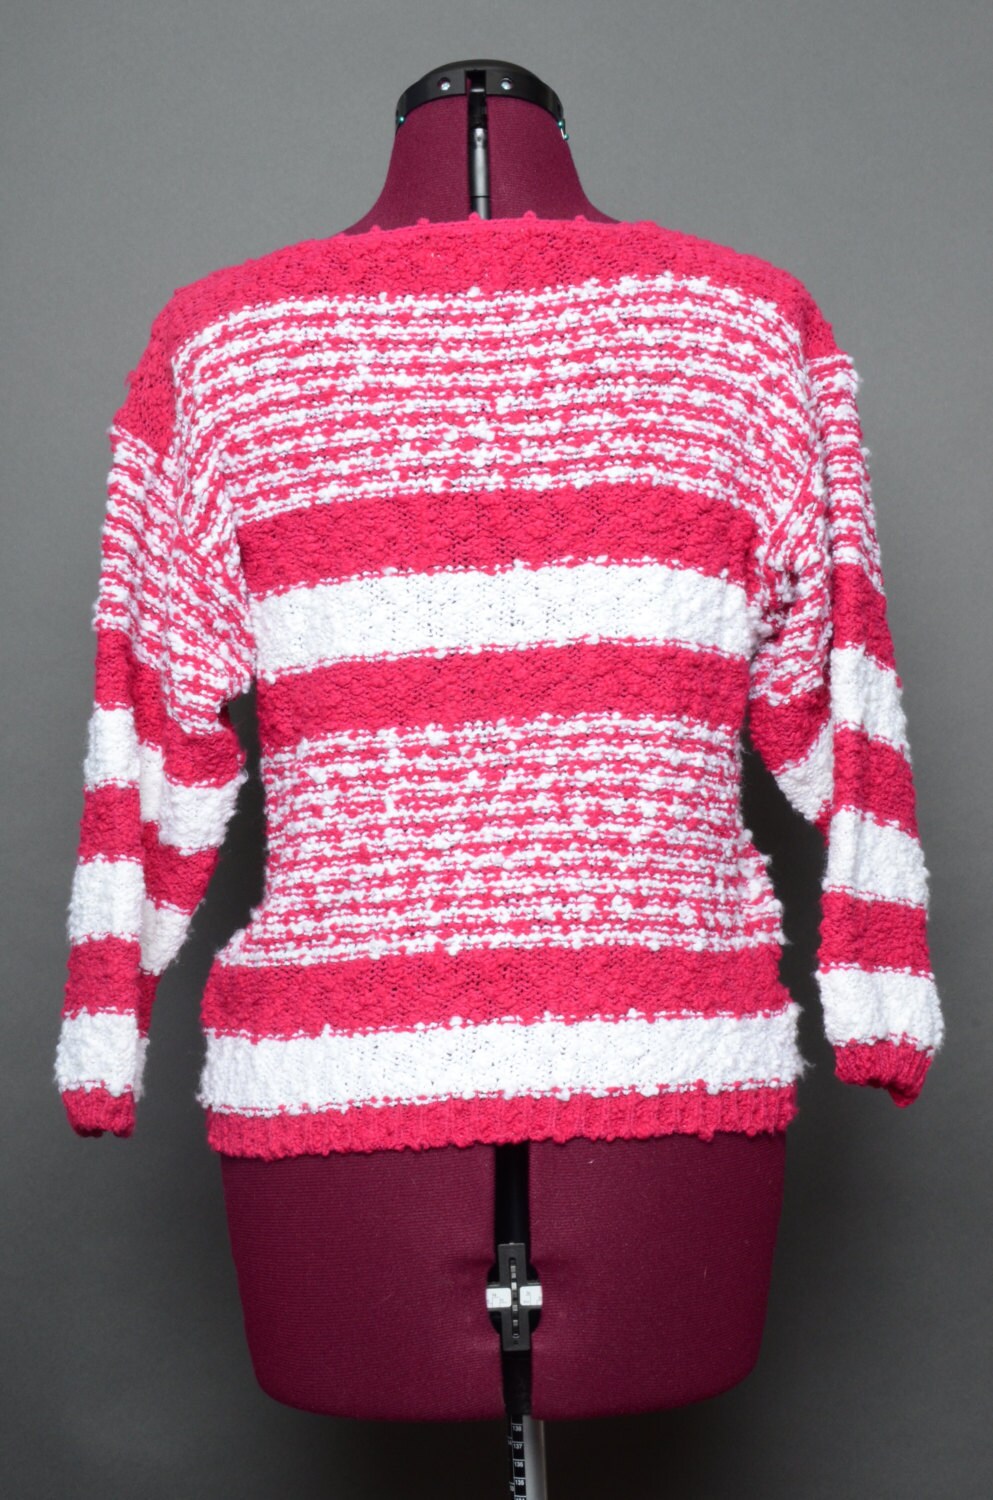 Knit Sweater Boucle Stripe 1990s Small Womens by HankAndGeorge